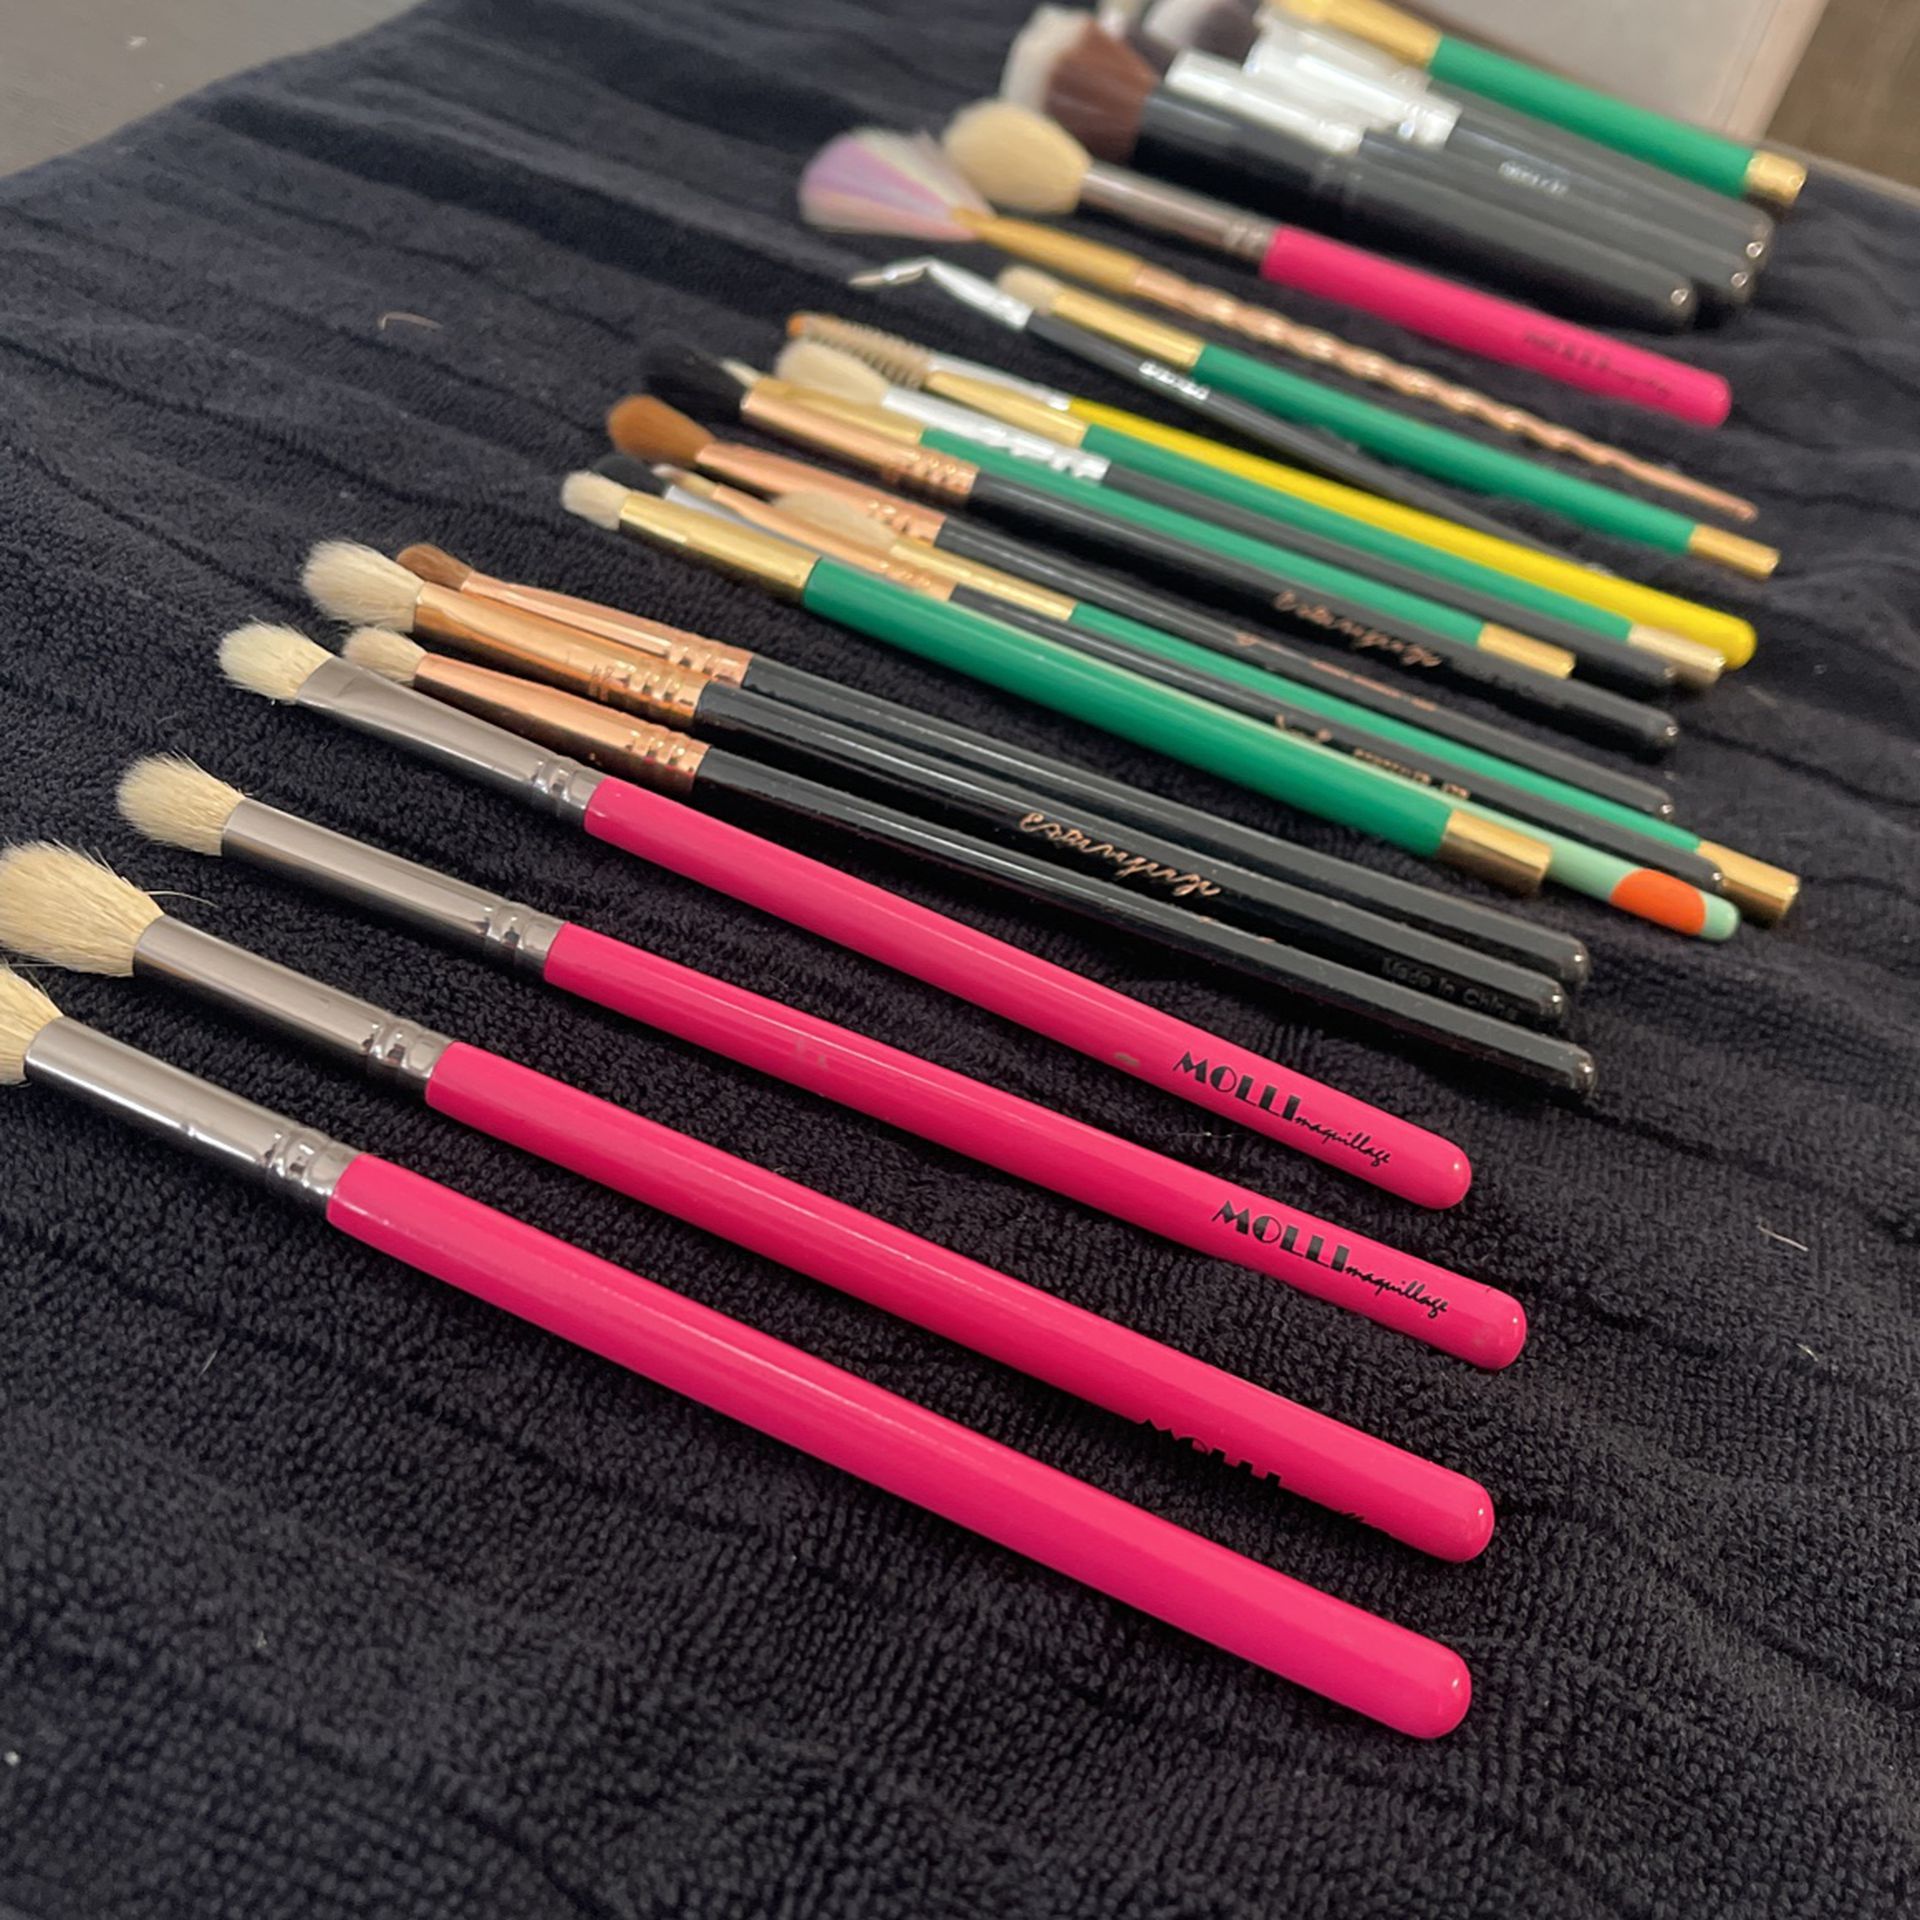 CLEAN Pre-loved makeup Brushes